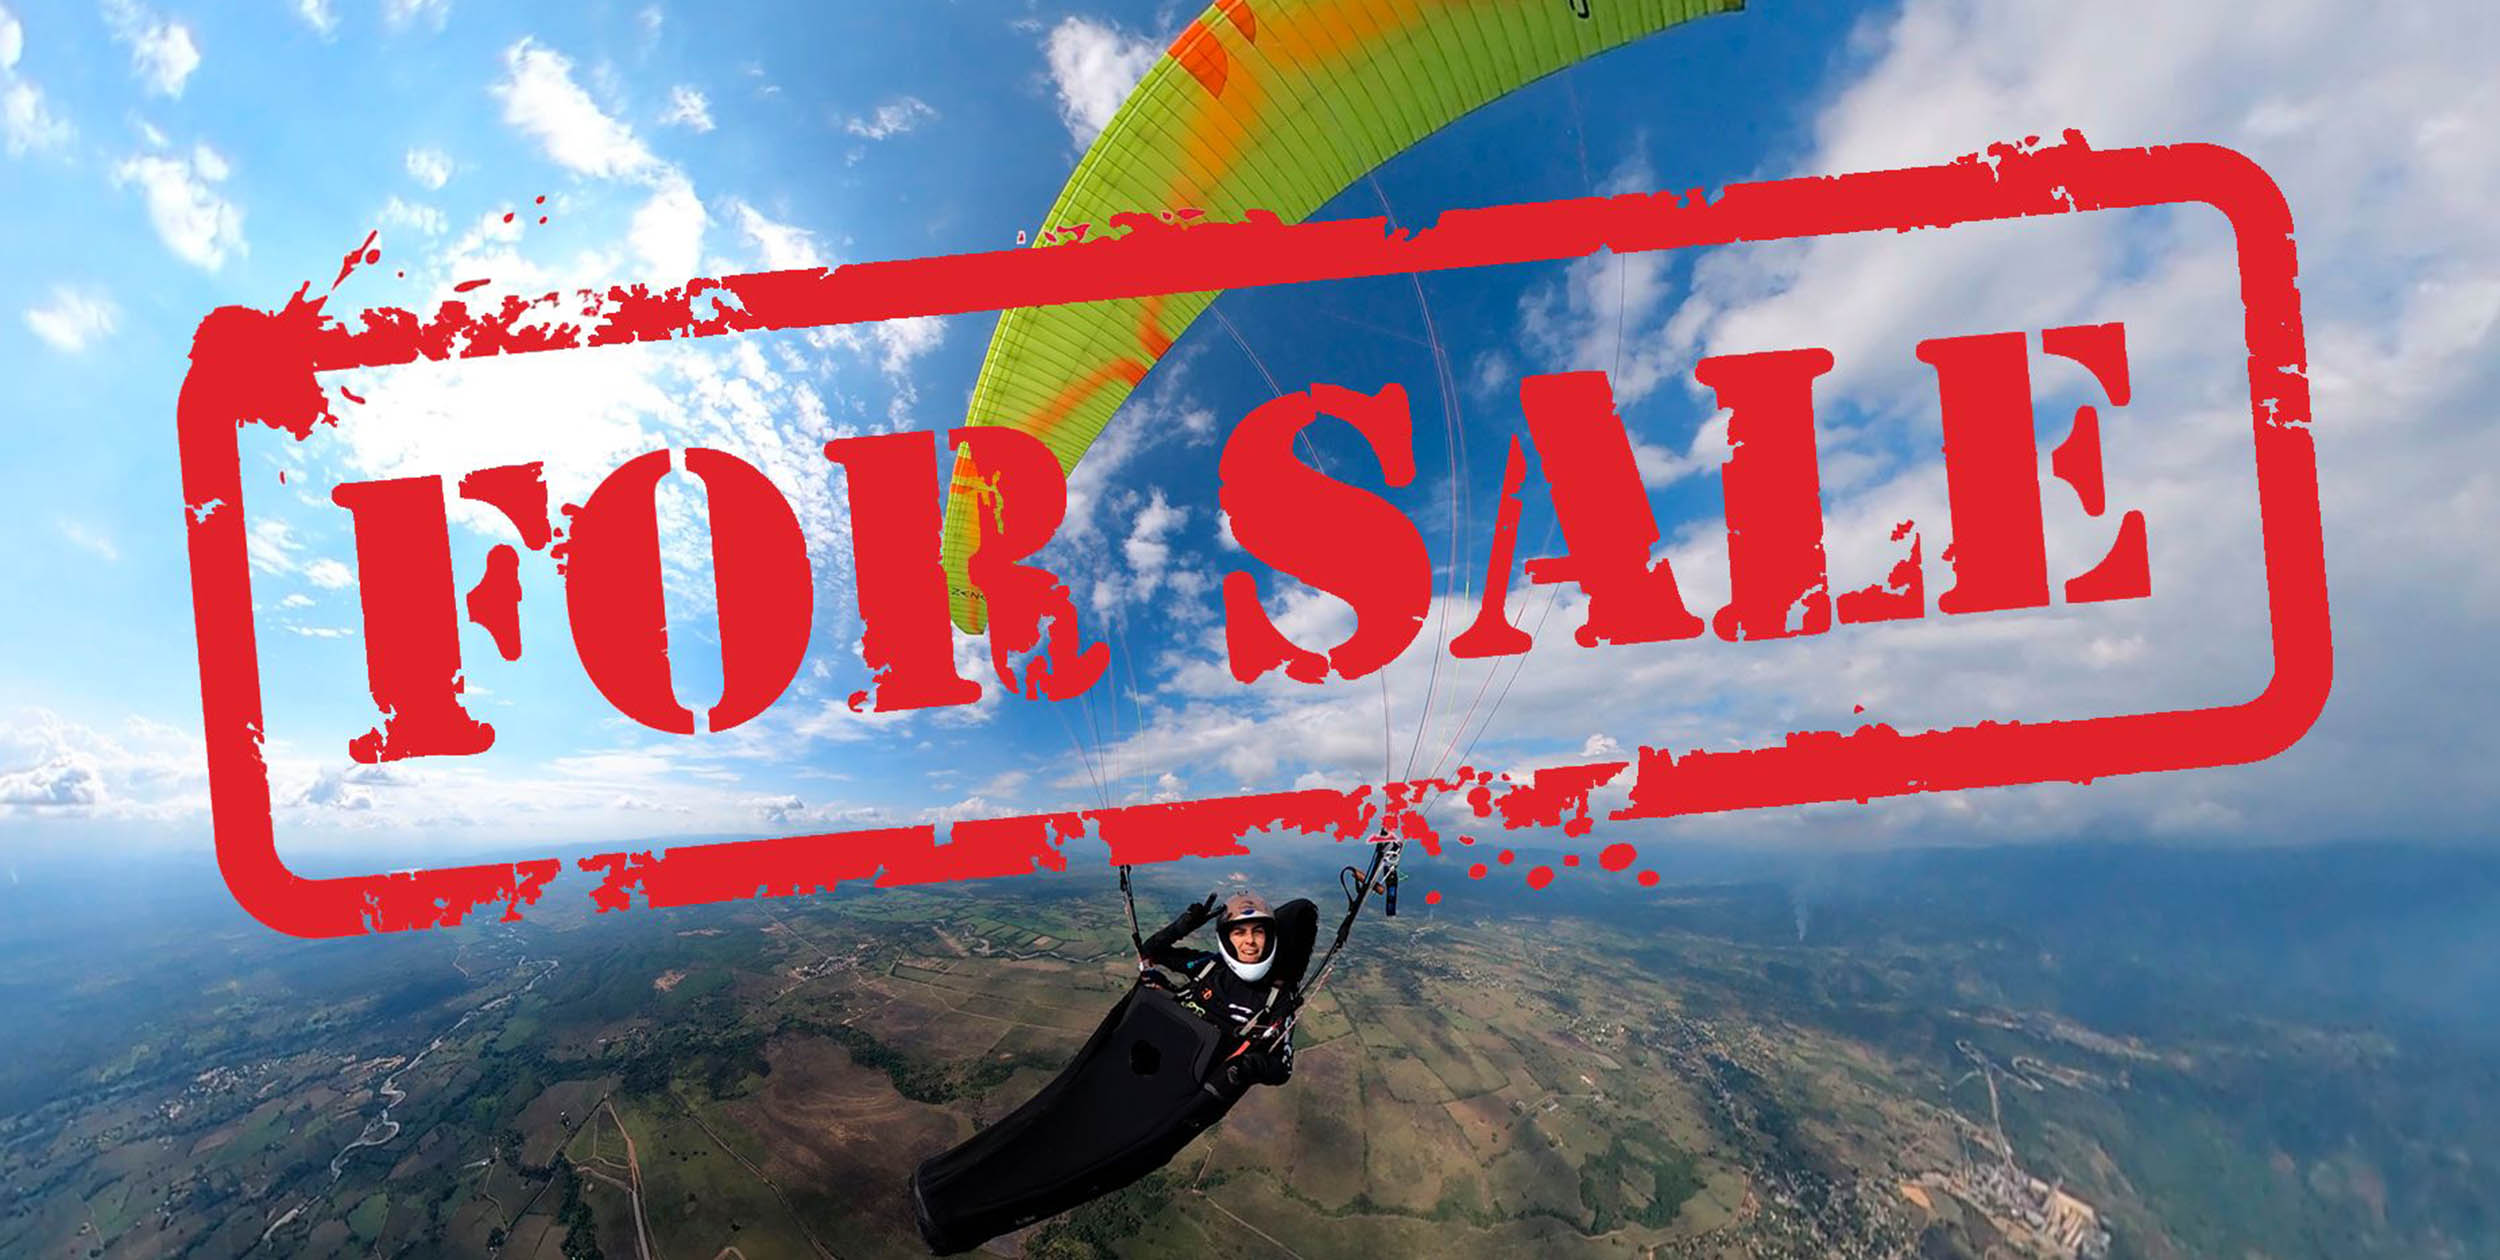 For sale – how to sell your used paragliding equipment